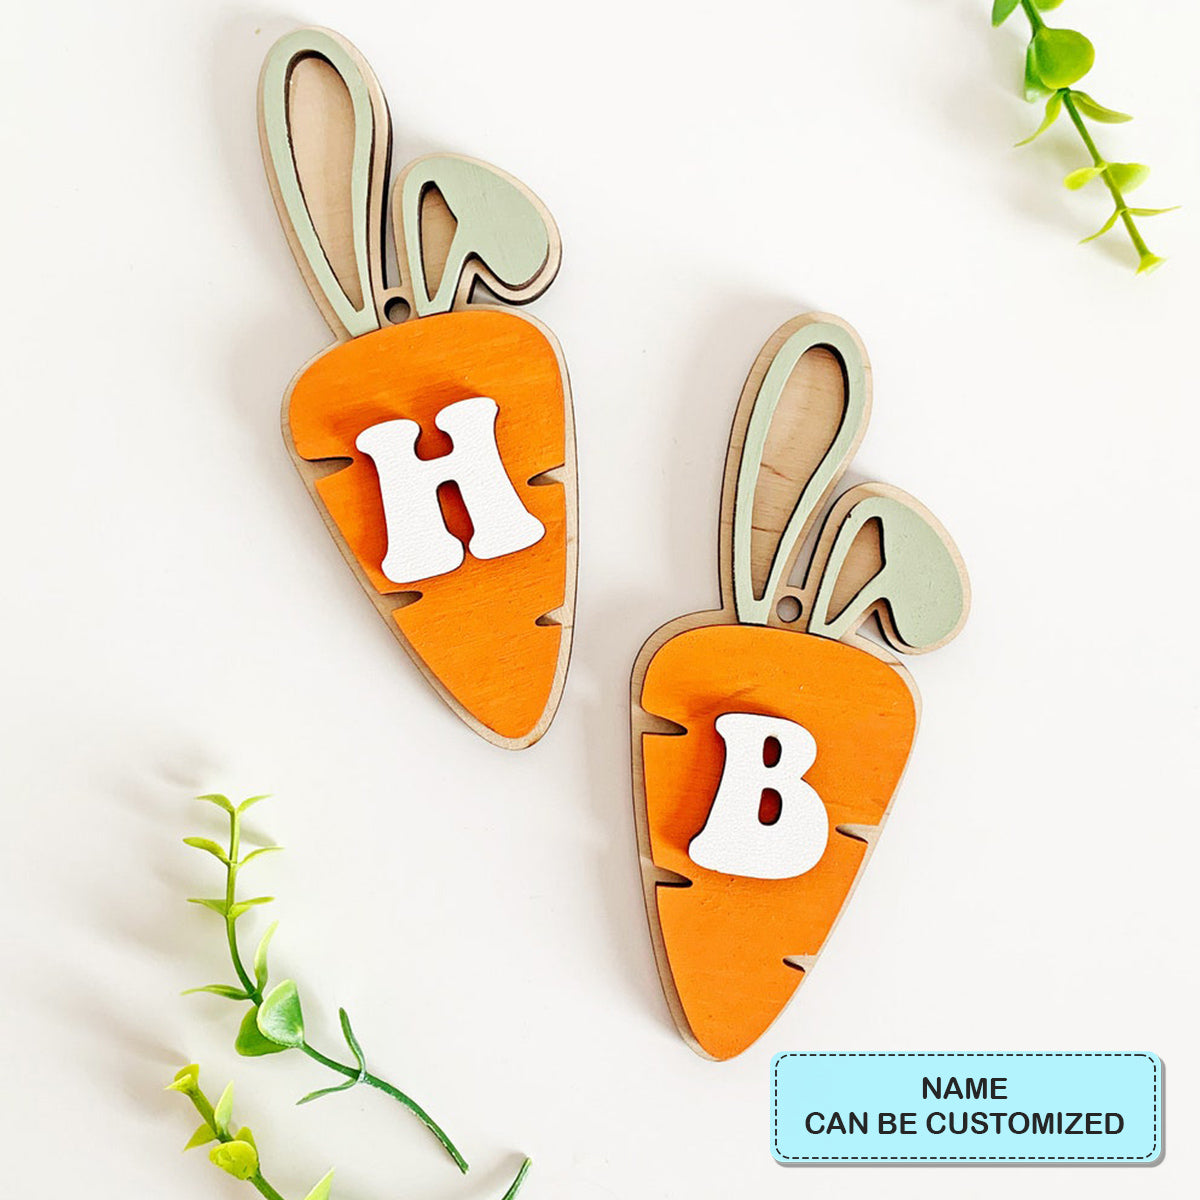 Alphabet Carrot Tag - Personalized Custom Basket Tag - Easter Gift For Family Members, Grandma, Mom